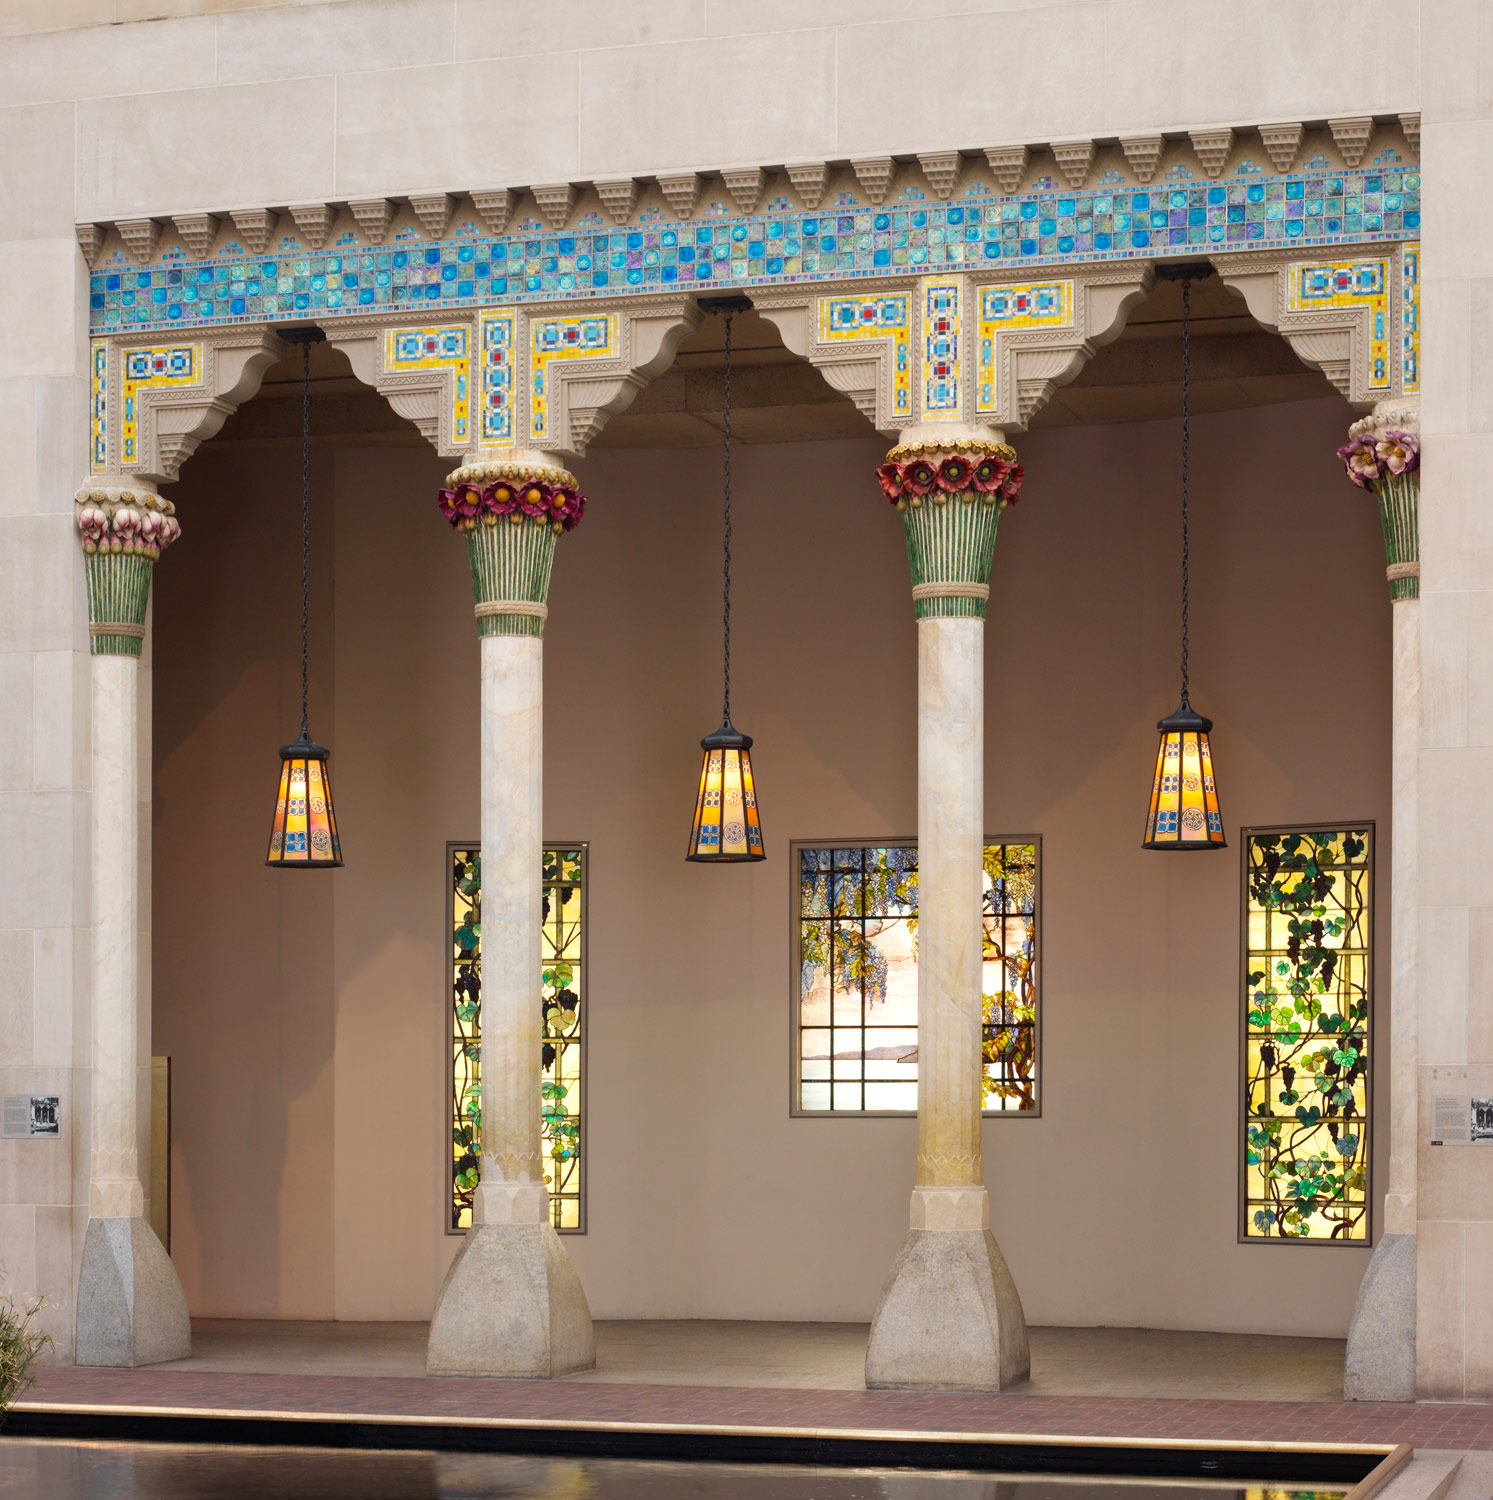 Architectural elements from laurelton hall  oyster bay  new york  designed by louis comfort tiffany  1905